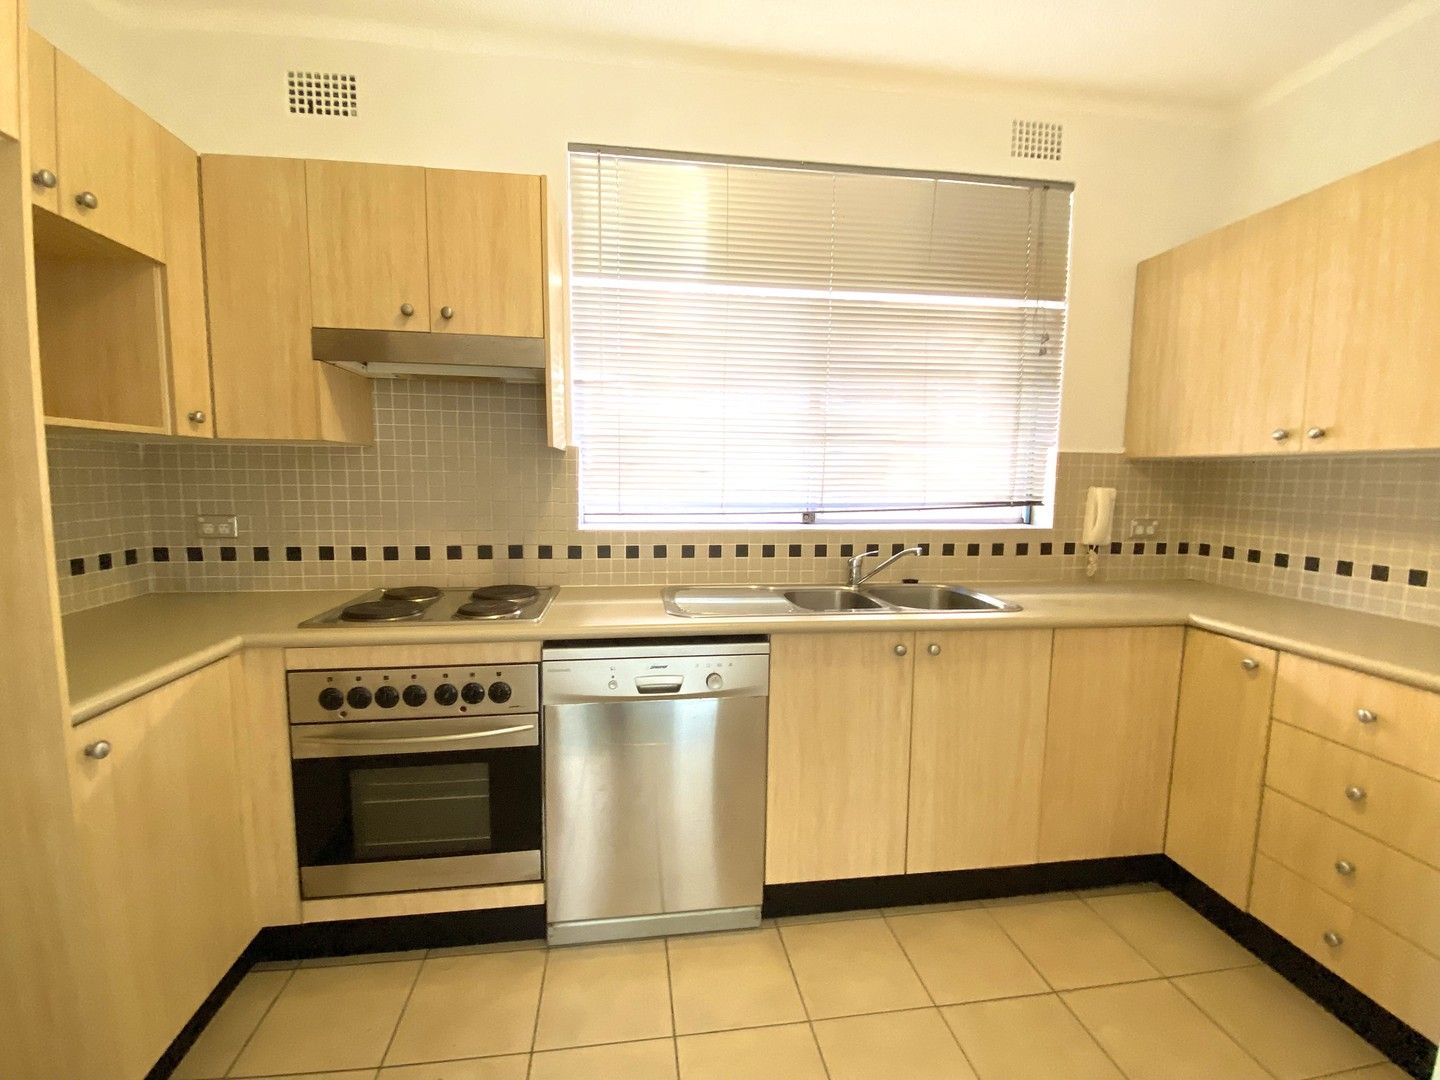 2 bedrooms Apartment / Unit / Flat in 1/81 Anzac Avenue WEST RYDE NSW, 2114